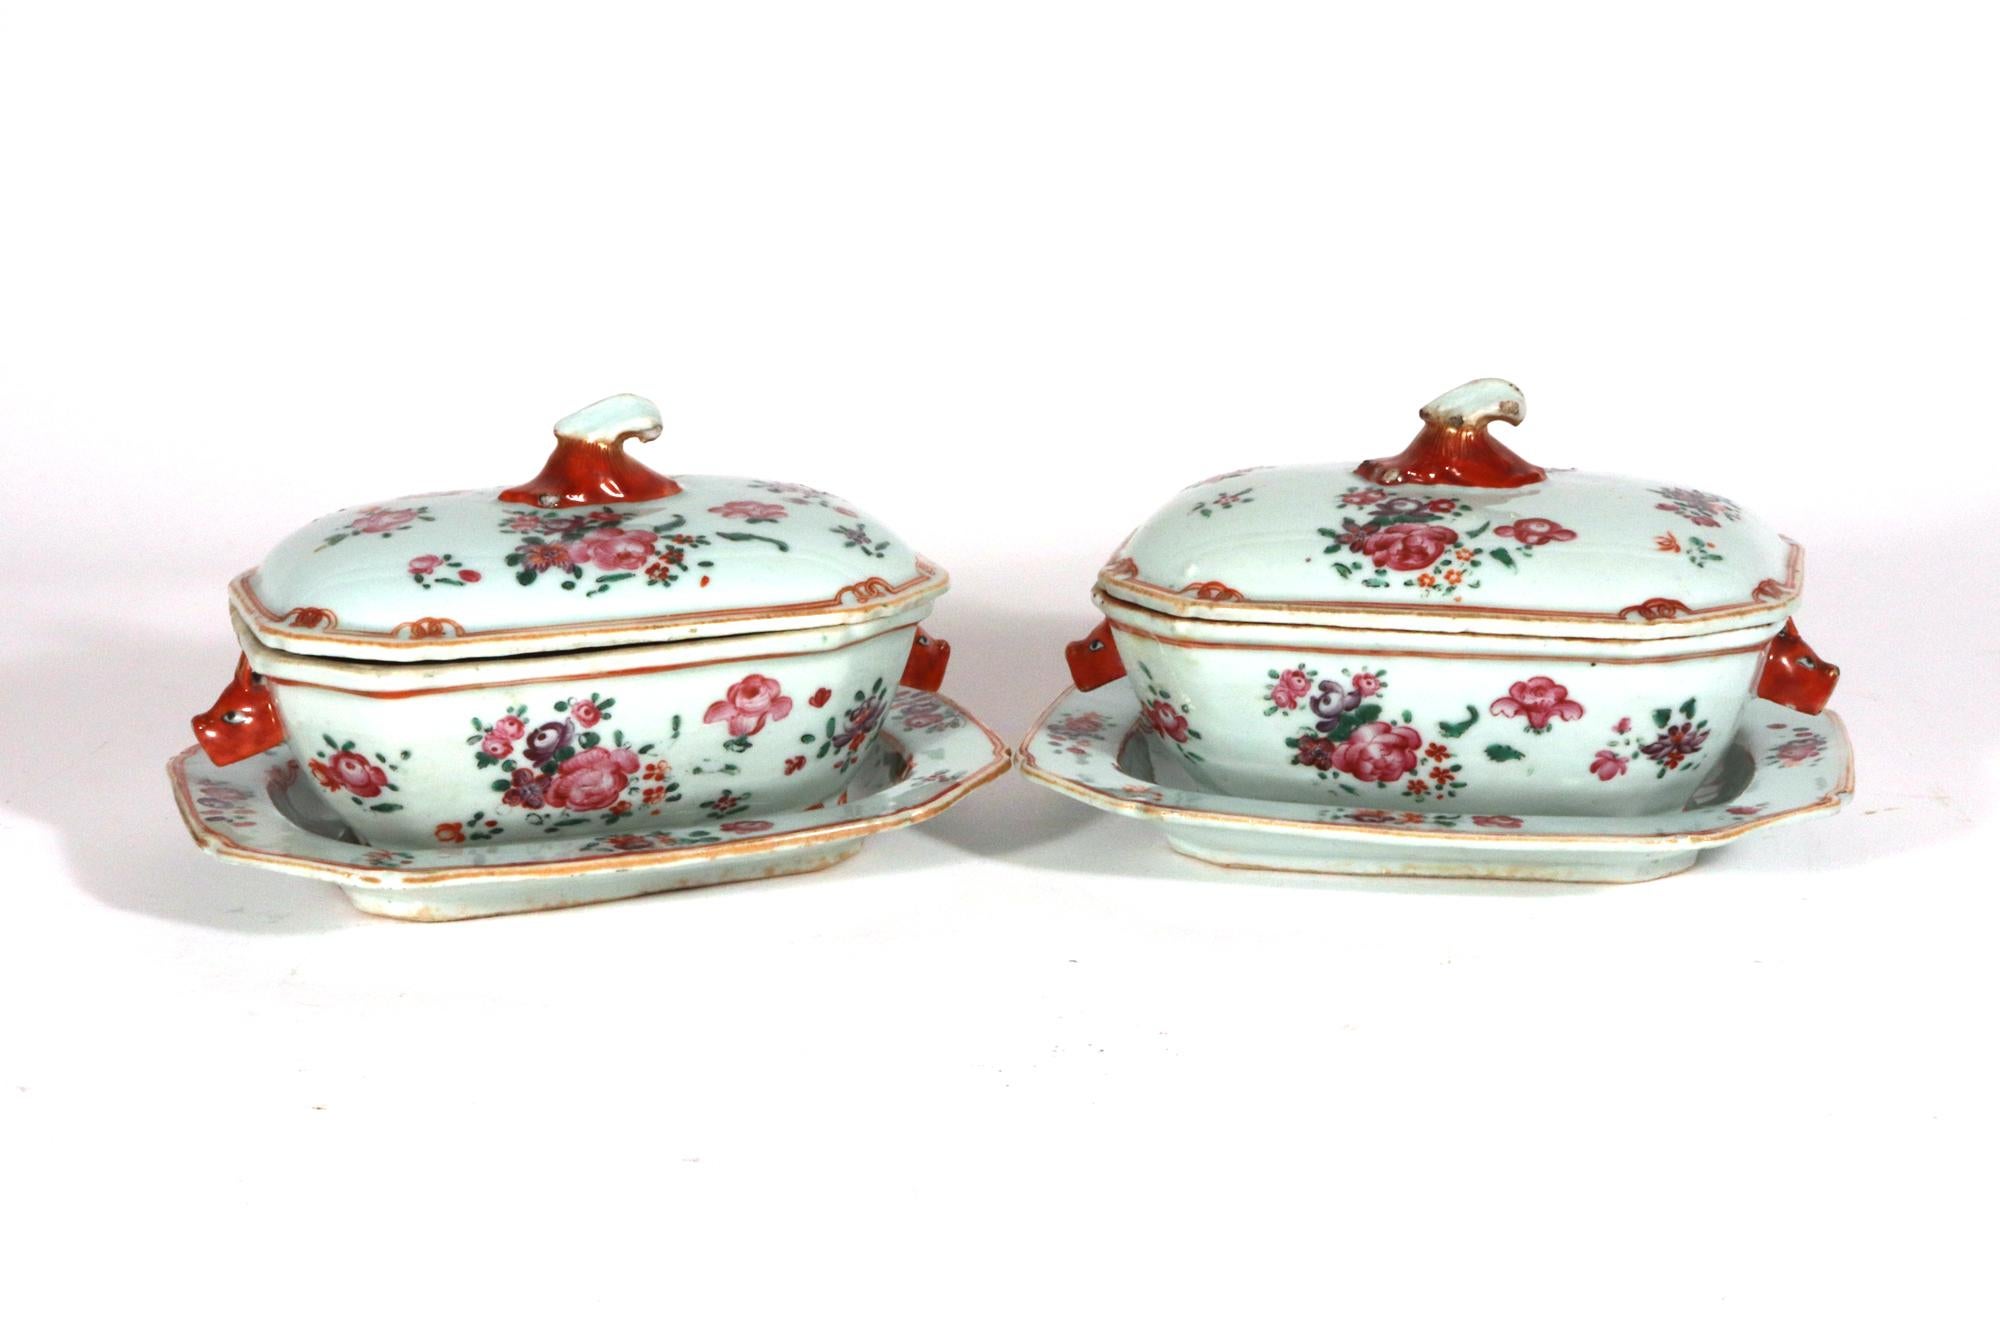 Chinese Export Porcelain Famille Rose Sauce Tureens, Covers & Stands For Sale 2